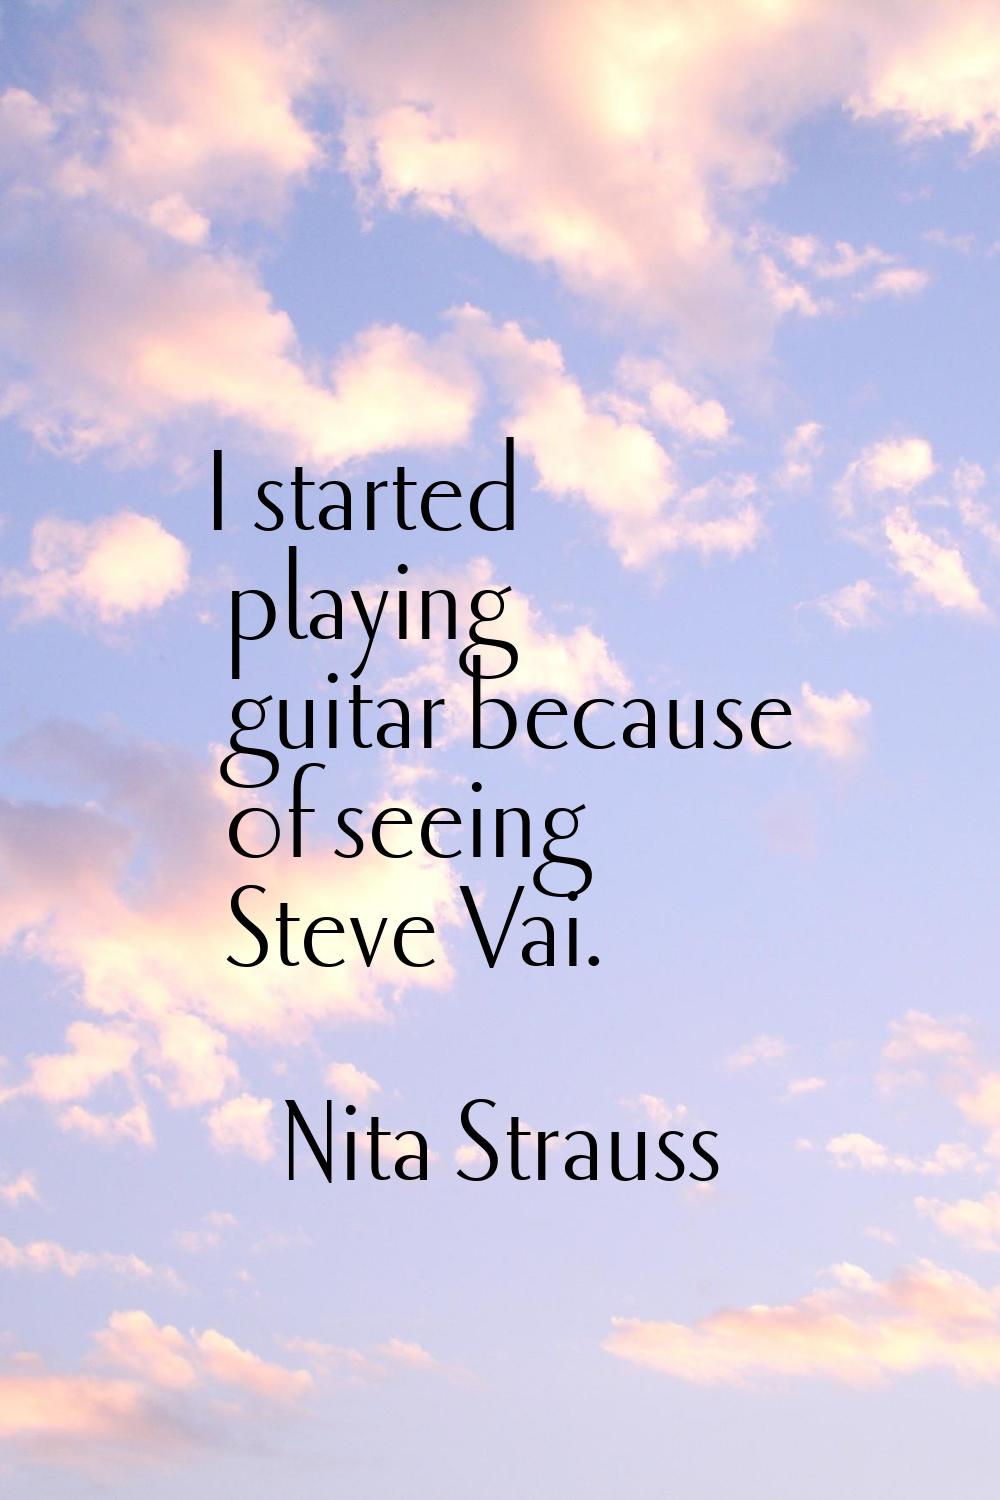 I started playing guitar because of seeing Steve Vai.